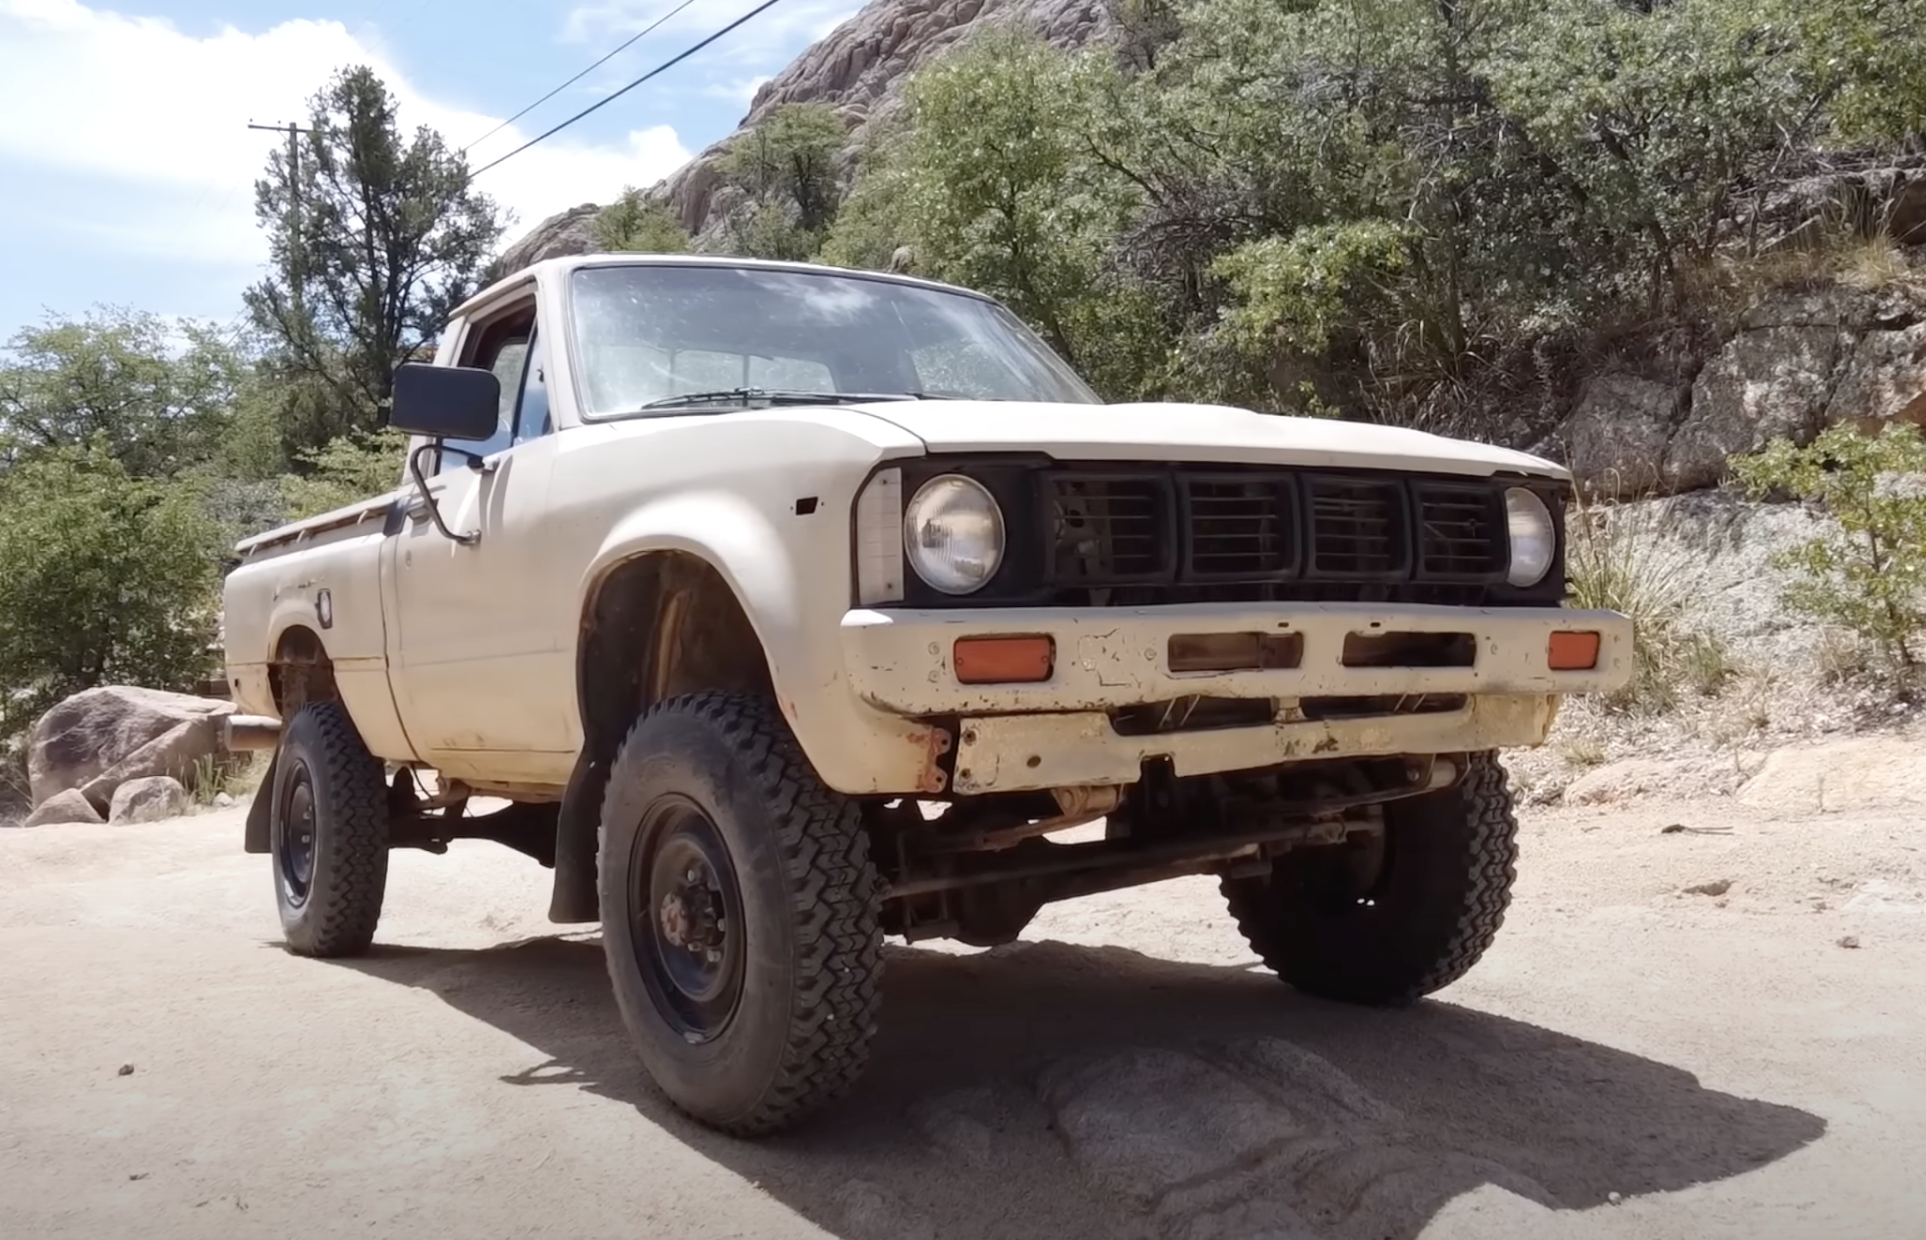 Video: One-Million Mile 1980 Toyota Hilux Pickup is Still Off-Roading with its Original Owner